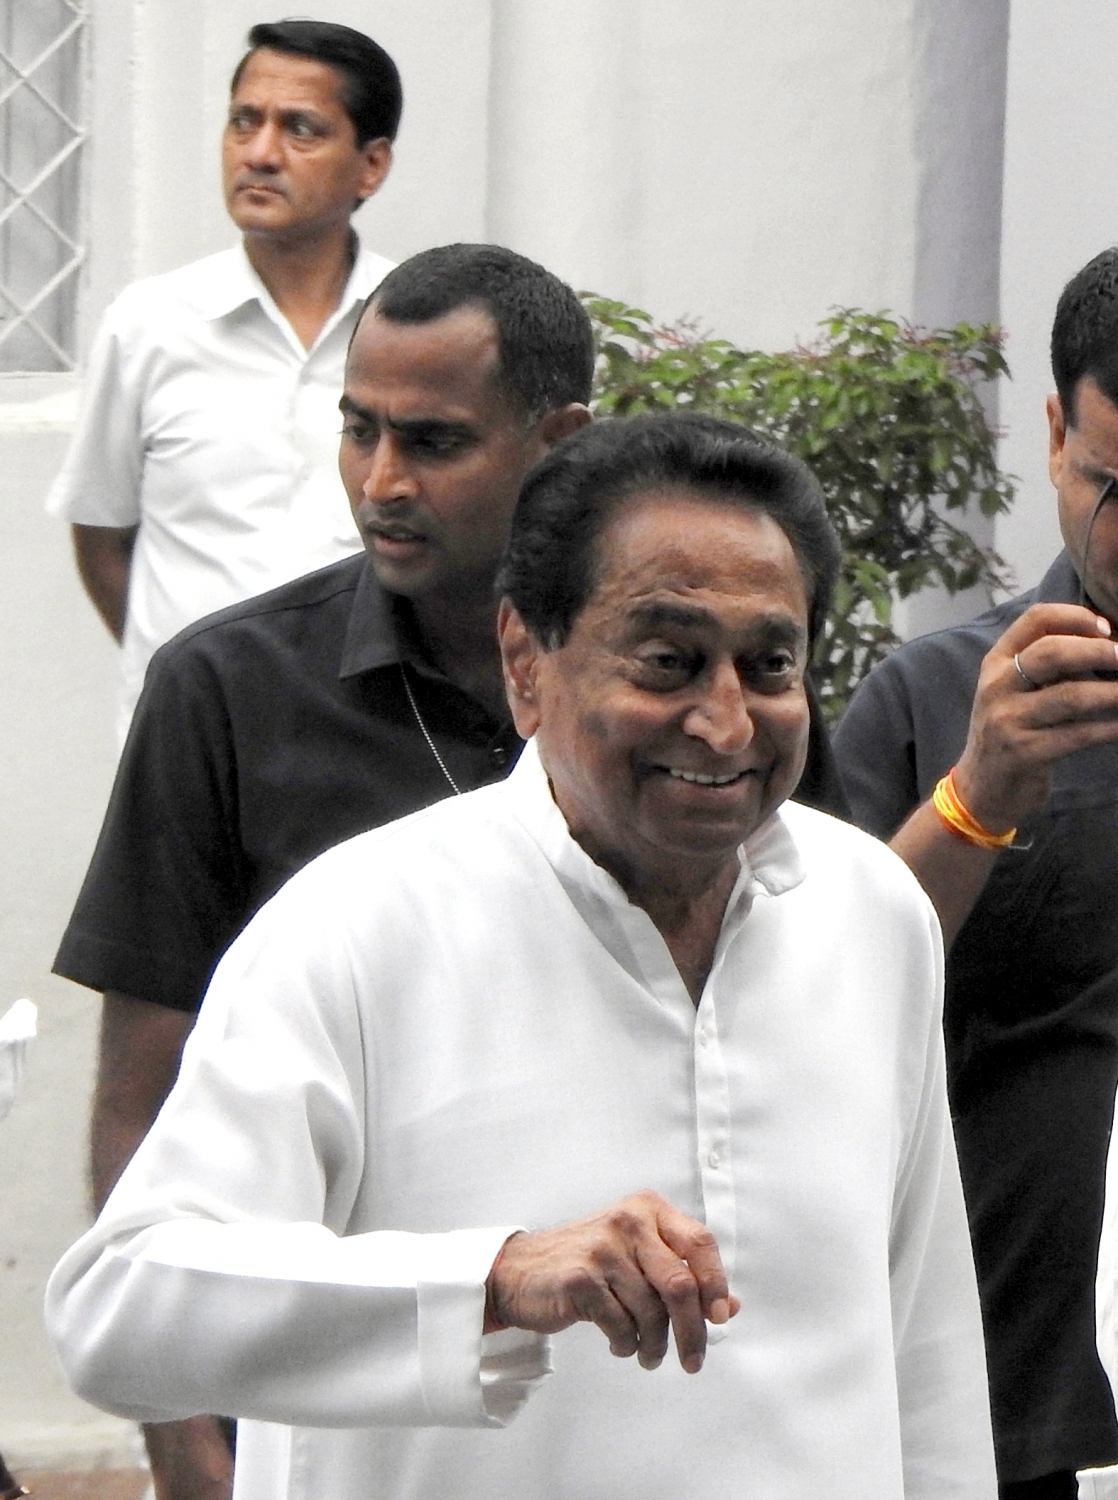  Congress Refutes Bjp's Claim, Says Kamal Nath To Be Cm Face In Mp-TeluguStop.com